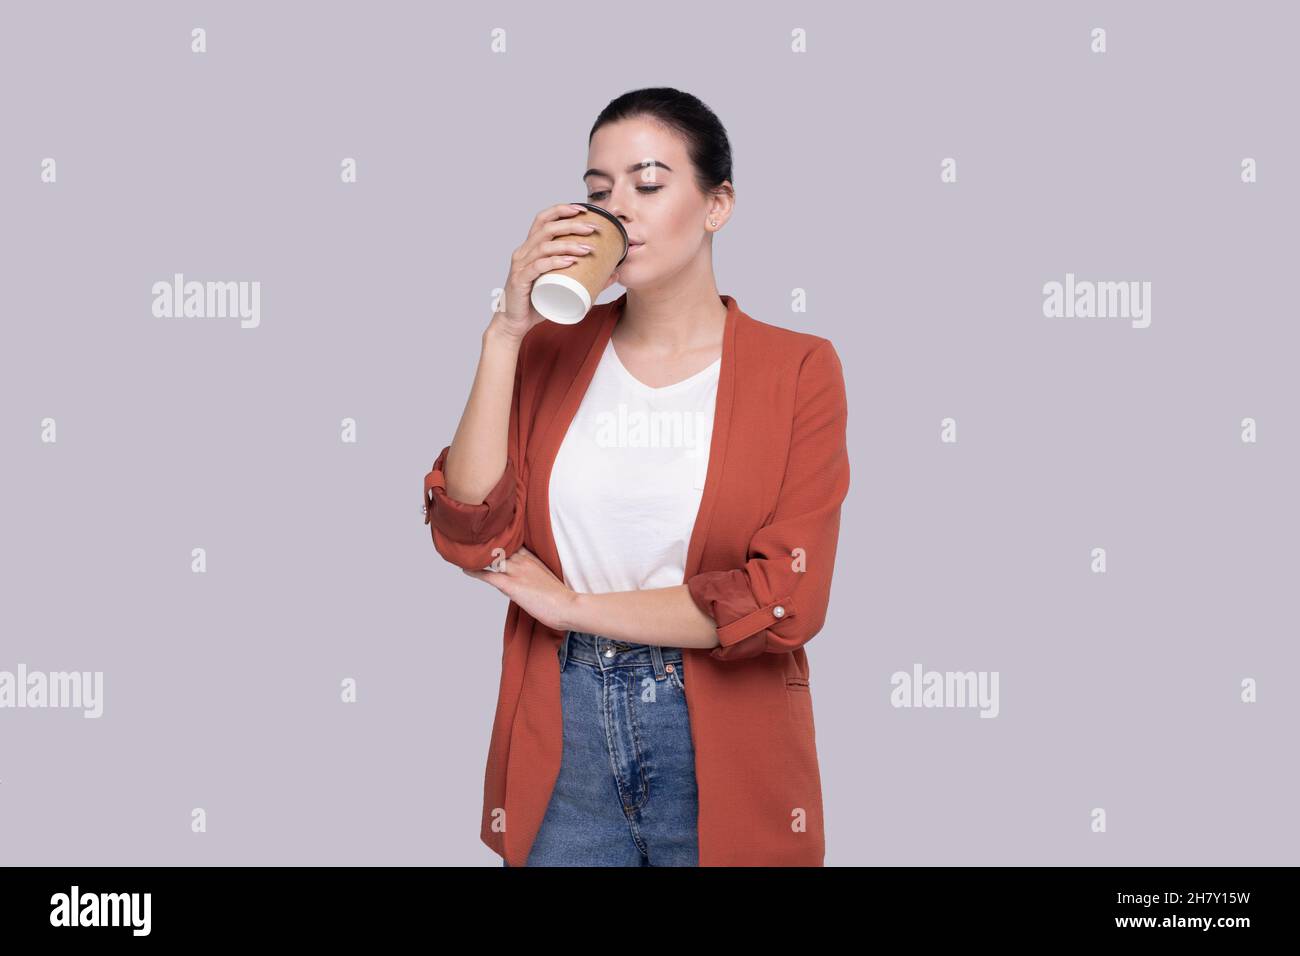 Girl Drinking Coffee from Take Away Cup. Girl With To Go Coffee Cup in Hands. Stock Photo